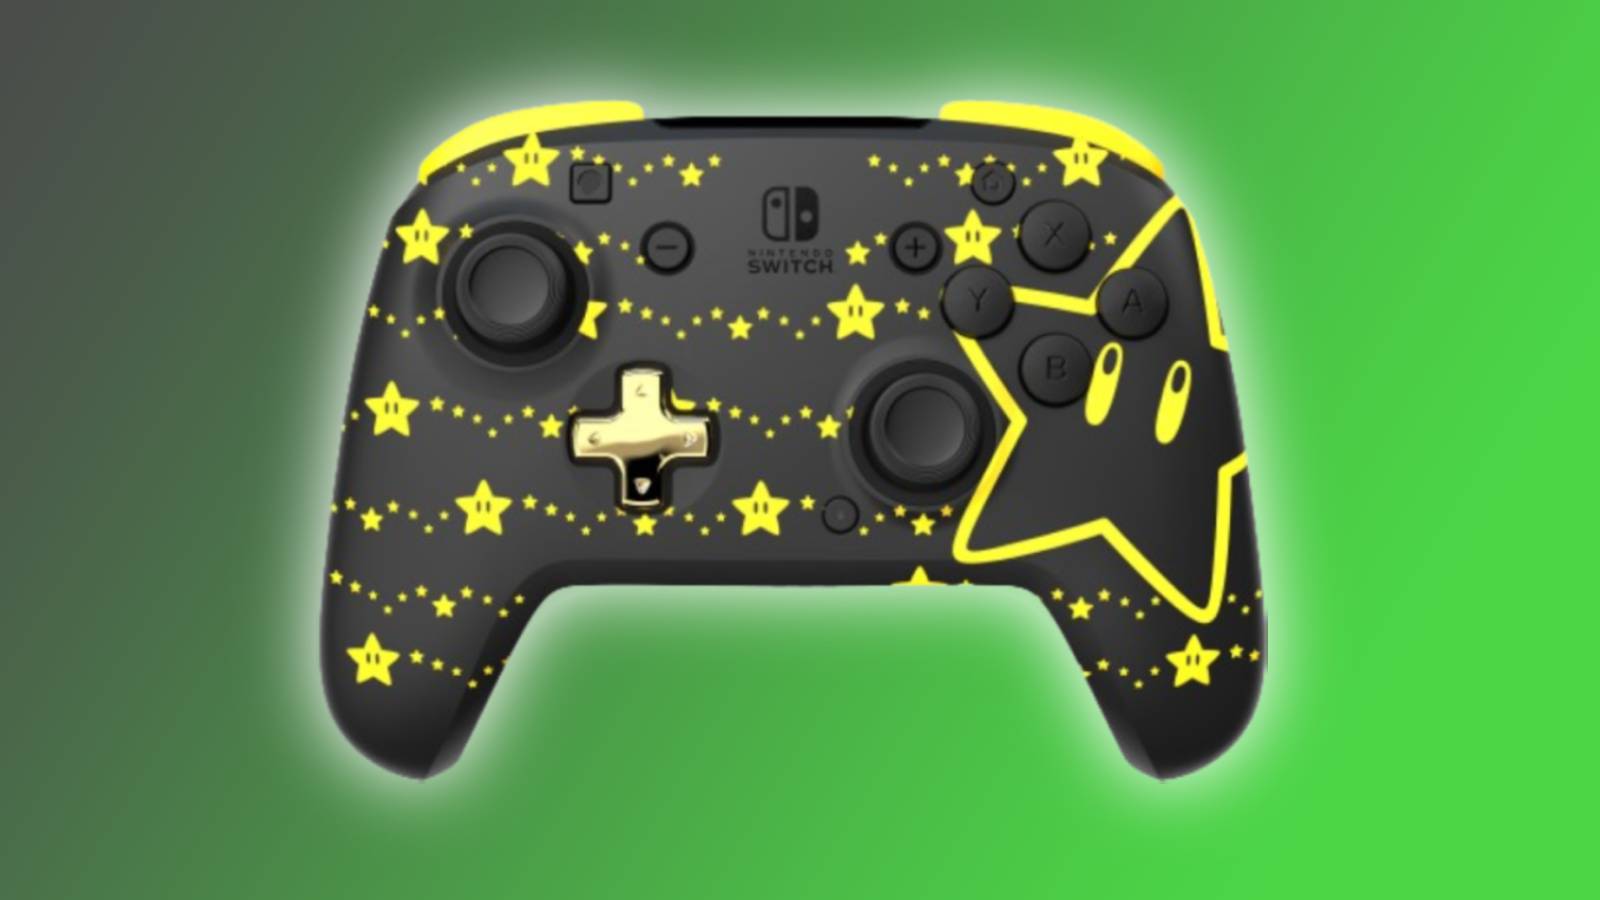 Image of the PDP Glow Nintendo Switch controller on a green and black background.